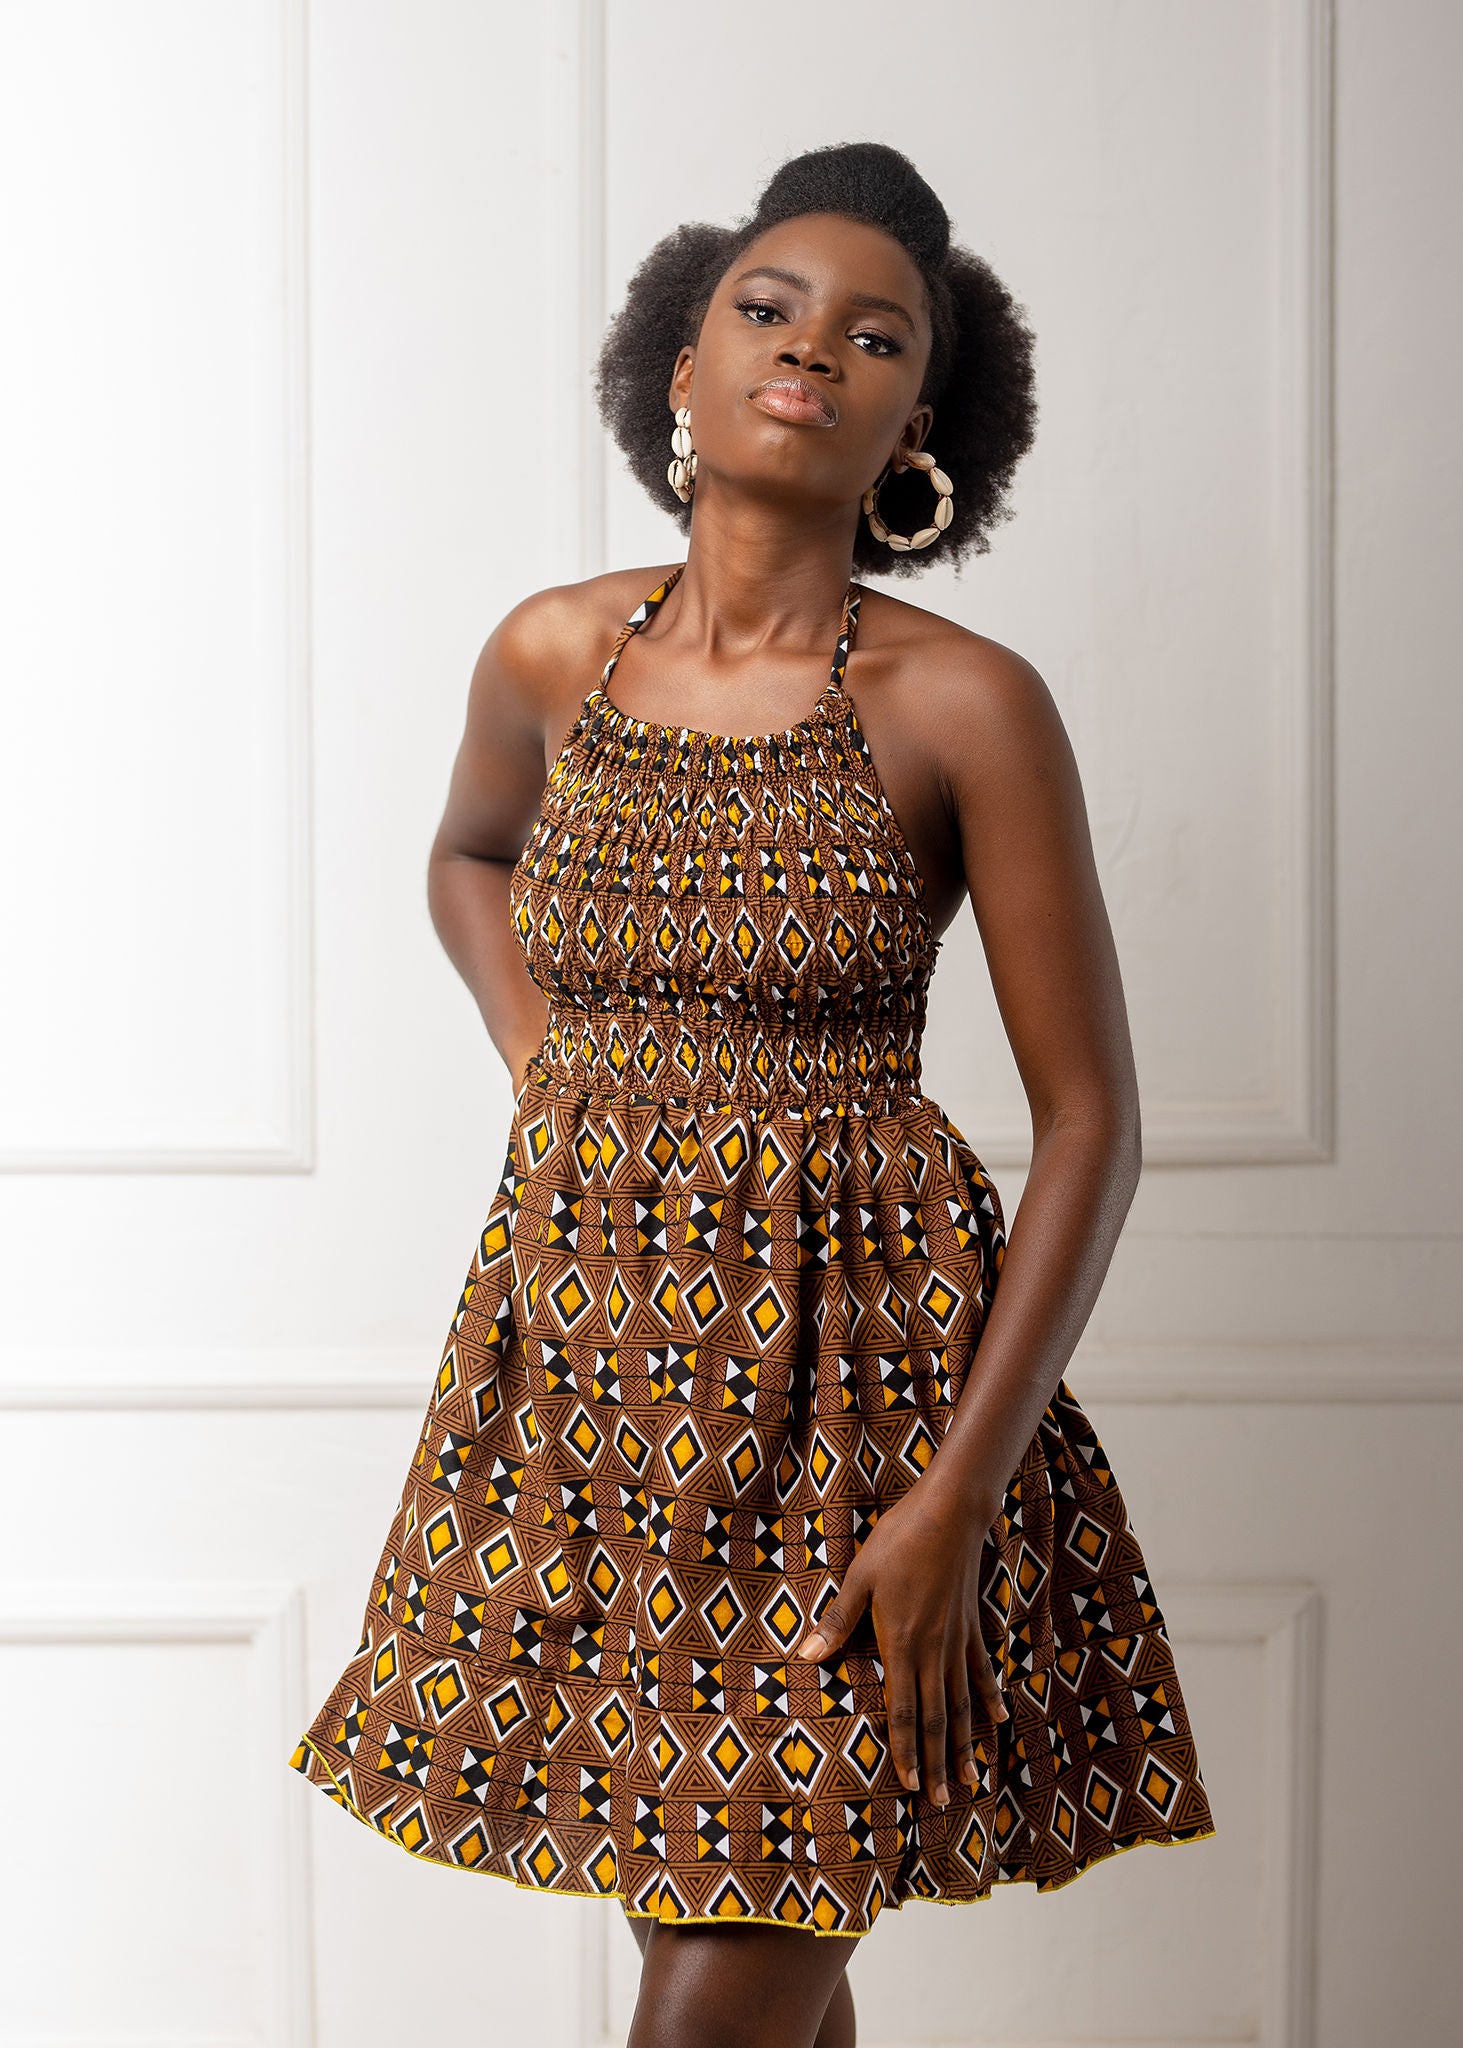 Pin by Emms on clothes | African fashion modern, African fashion  traditional, African print fashion